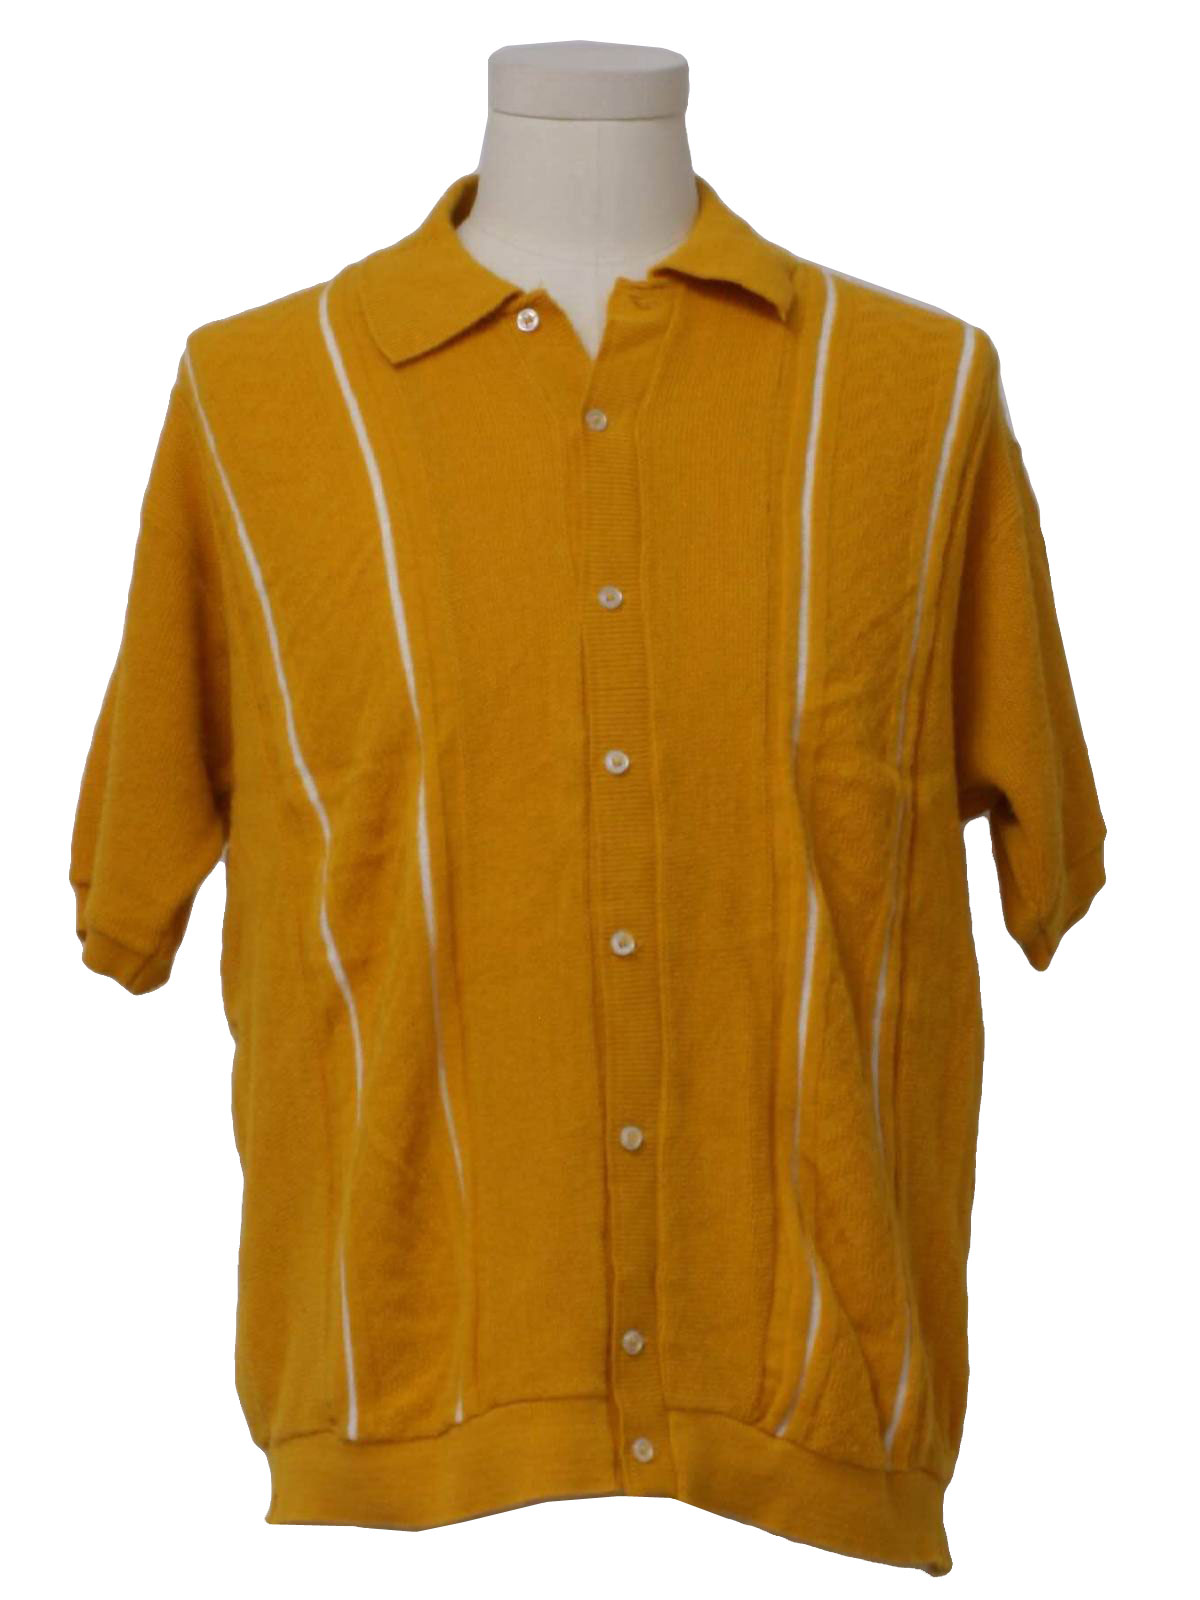 Vintage 1960's Knit Shirt: 60s -no label- Mens dark gold and white ...